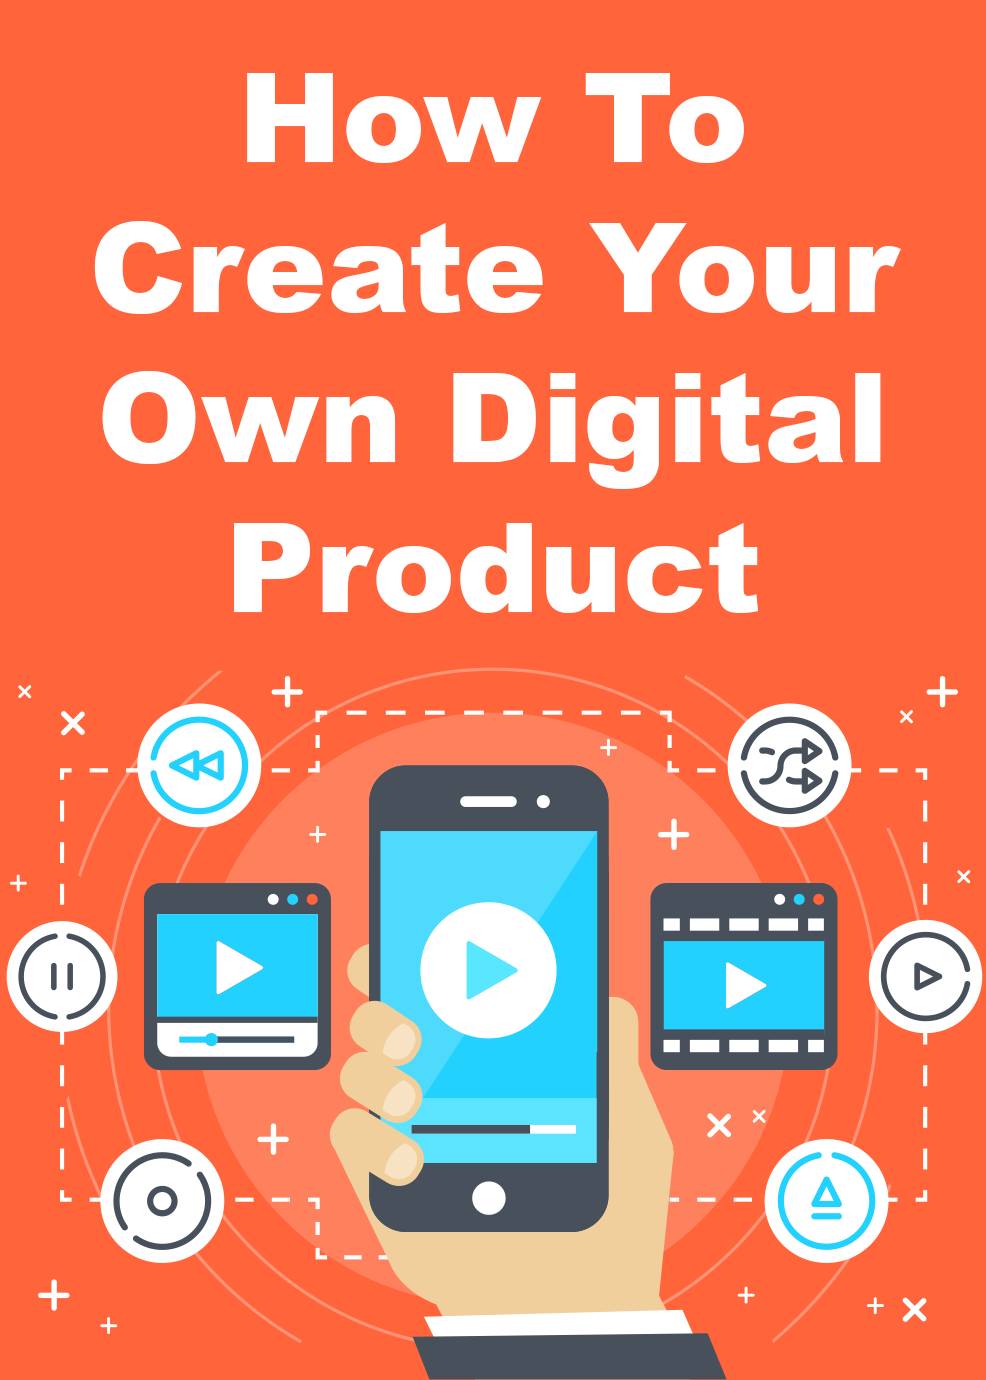 How to Create Your Own Digital Product